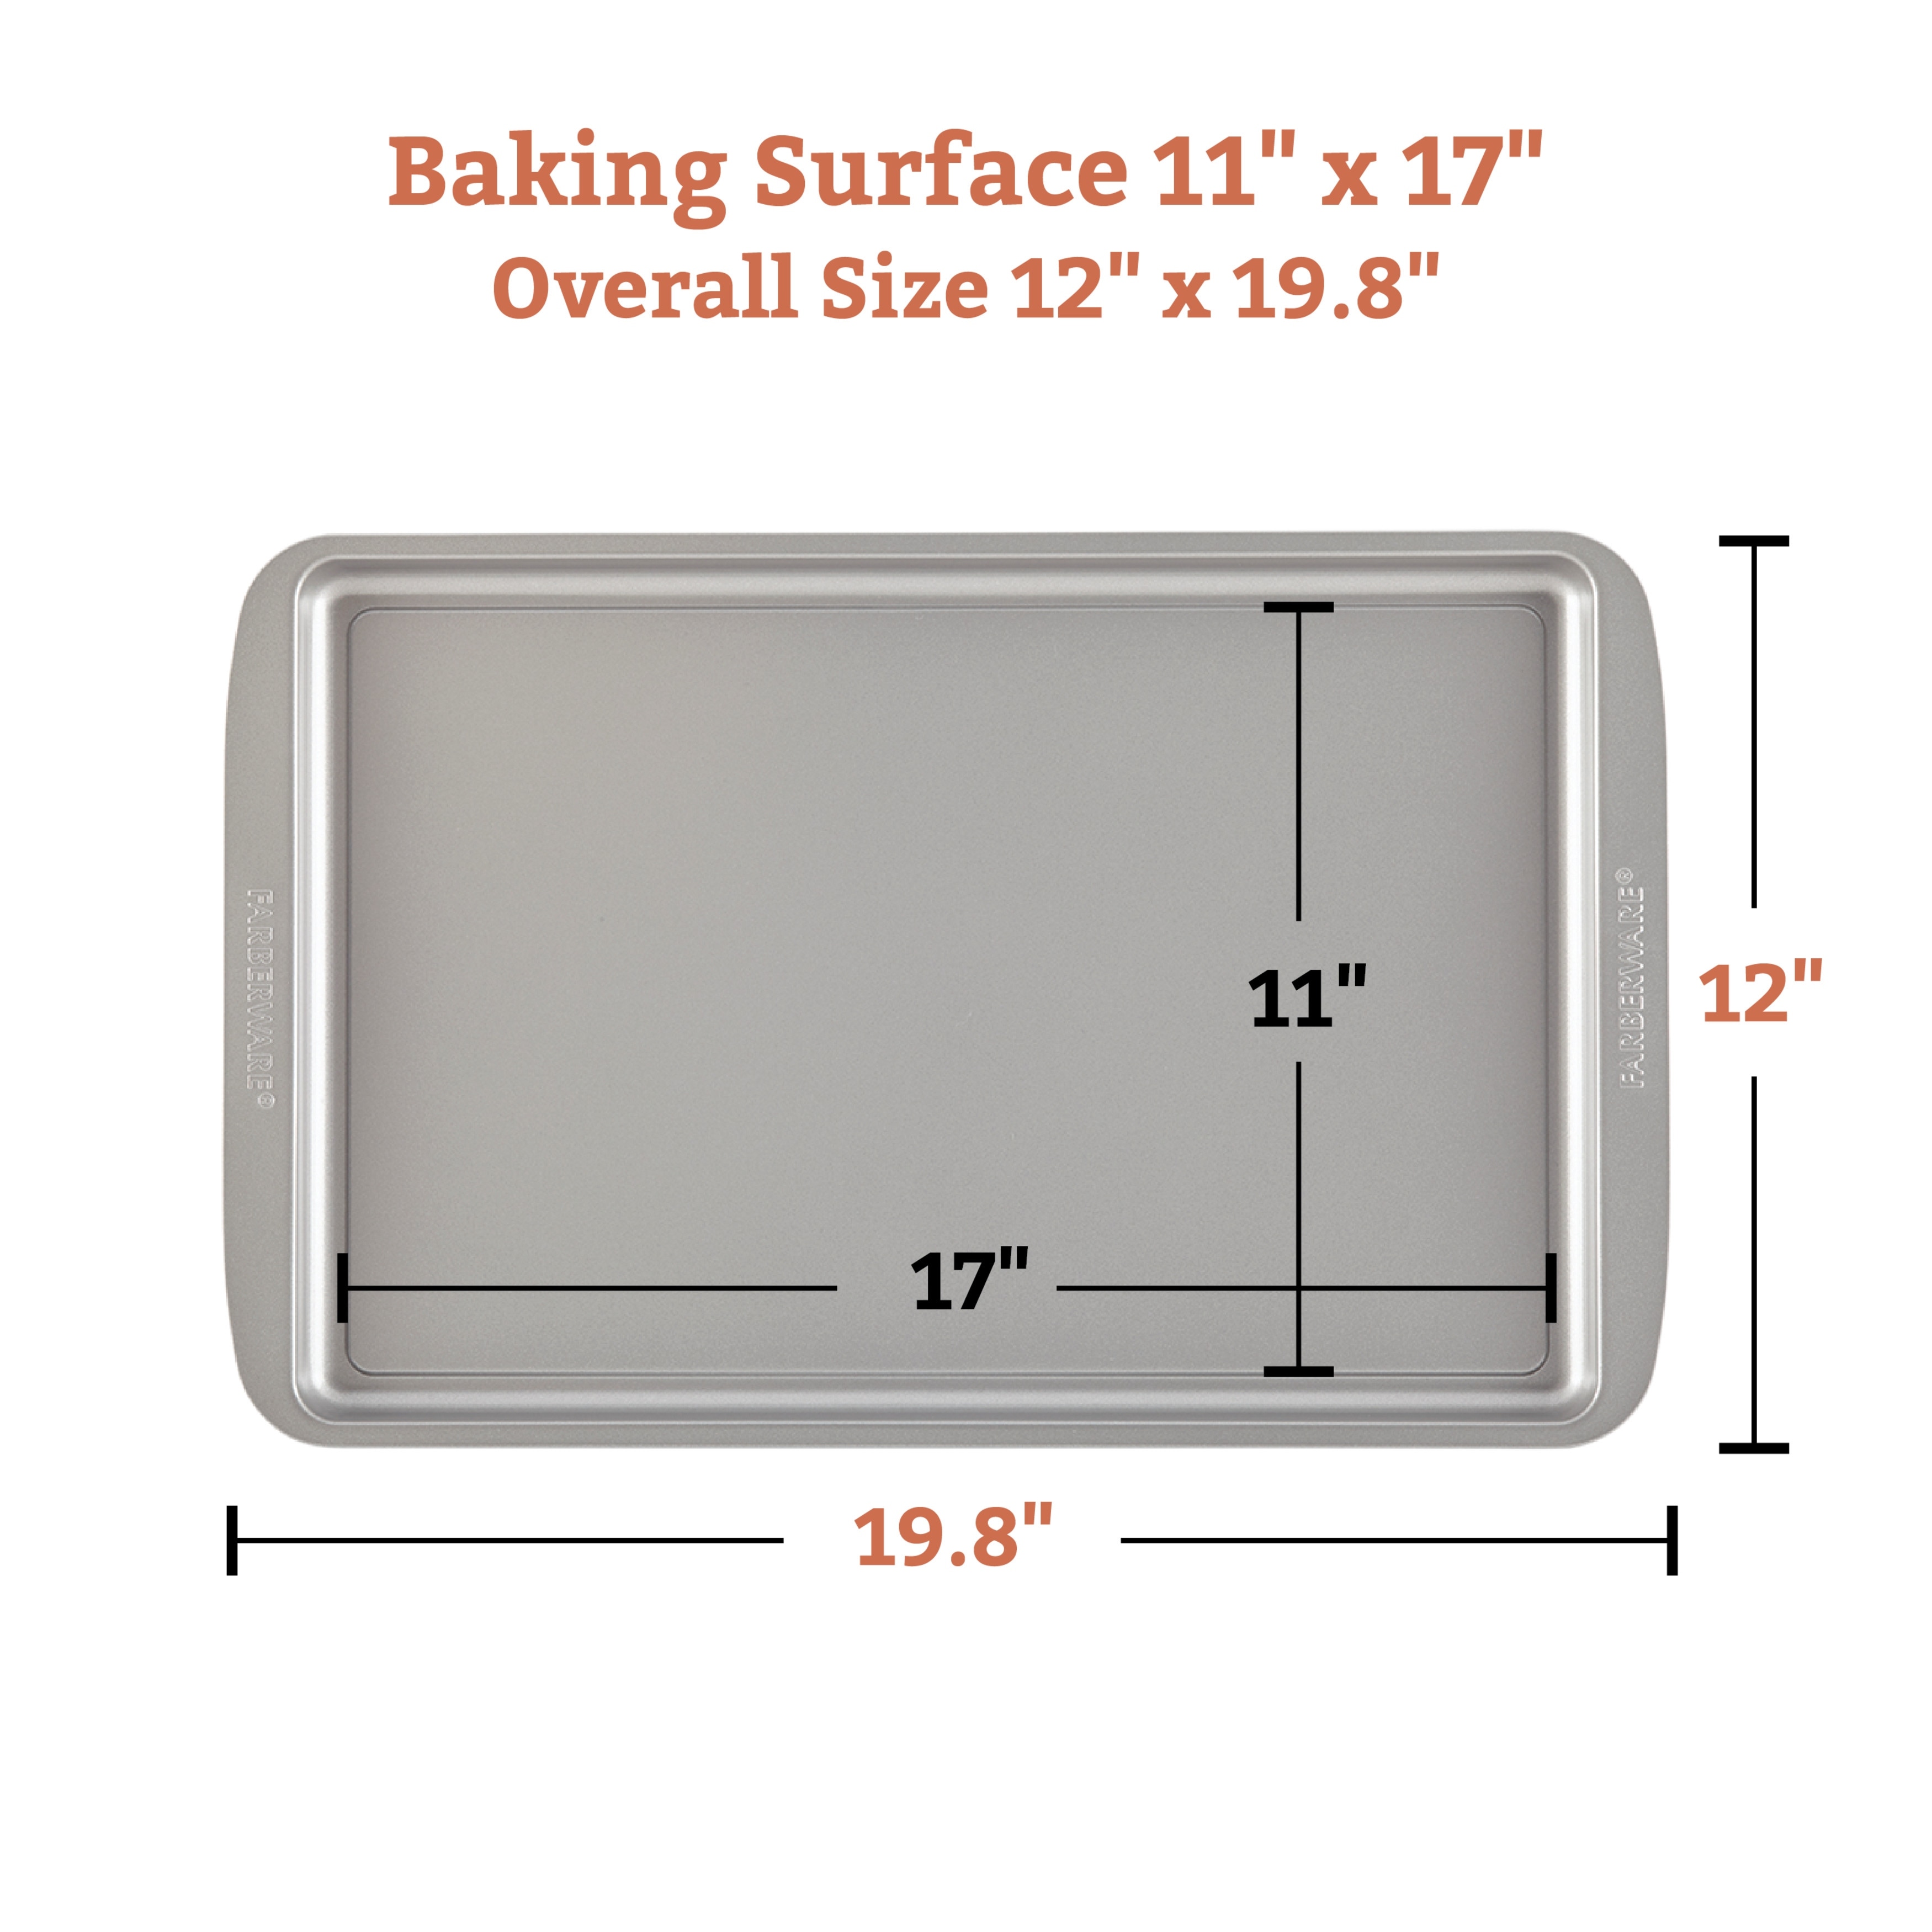 Farberware Insulated Nonstick Bakeware 15 1/2-inch Light Grey Round Pizza  Pan - Bed Bath & Beyond - 7469183